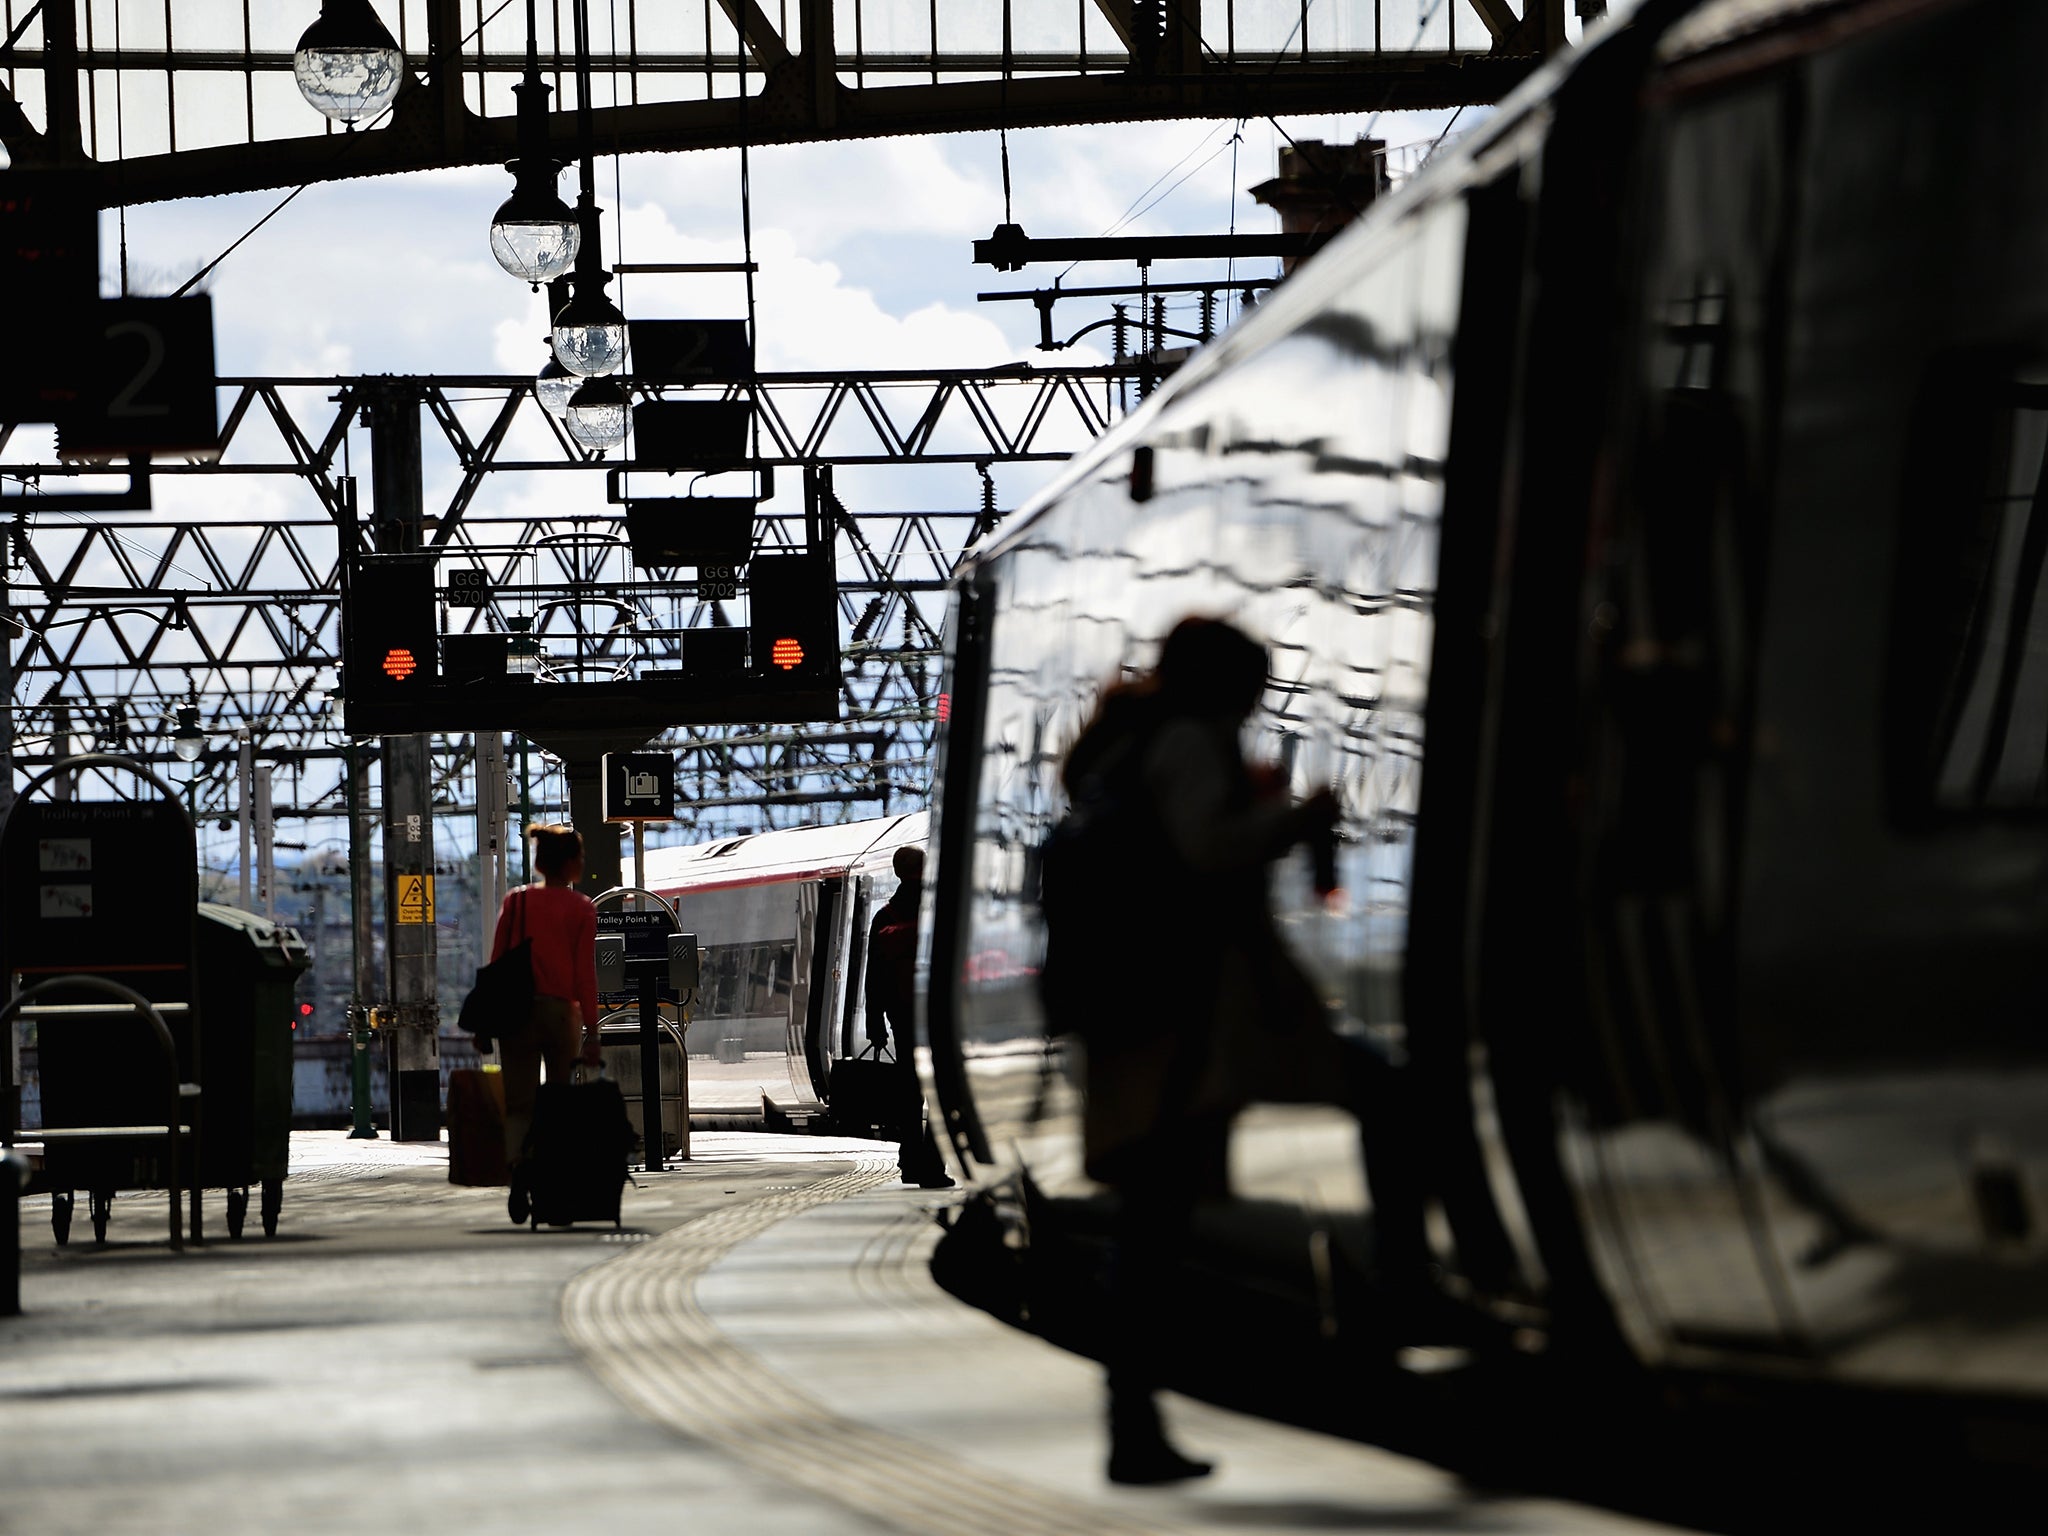 One of the largest franchises, Network Rail, which maintains and runs 20,000 miles of track and 40,000 bridges, has struggled with the rapid increase in passenger numbers